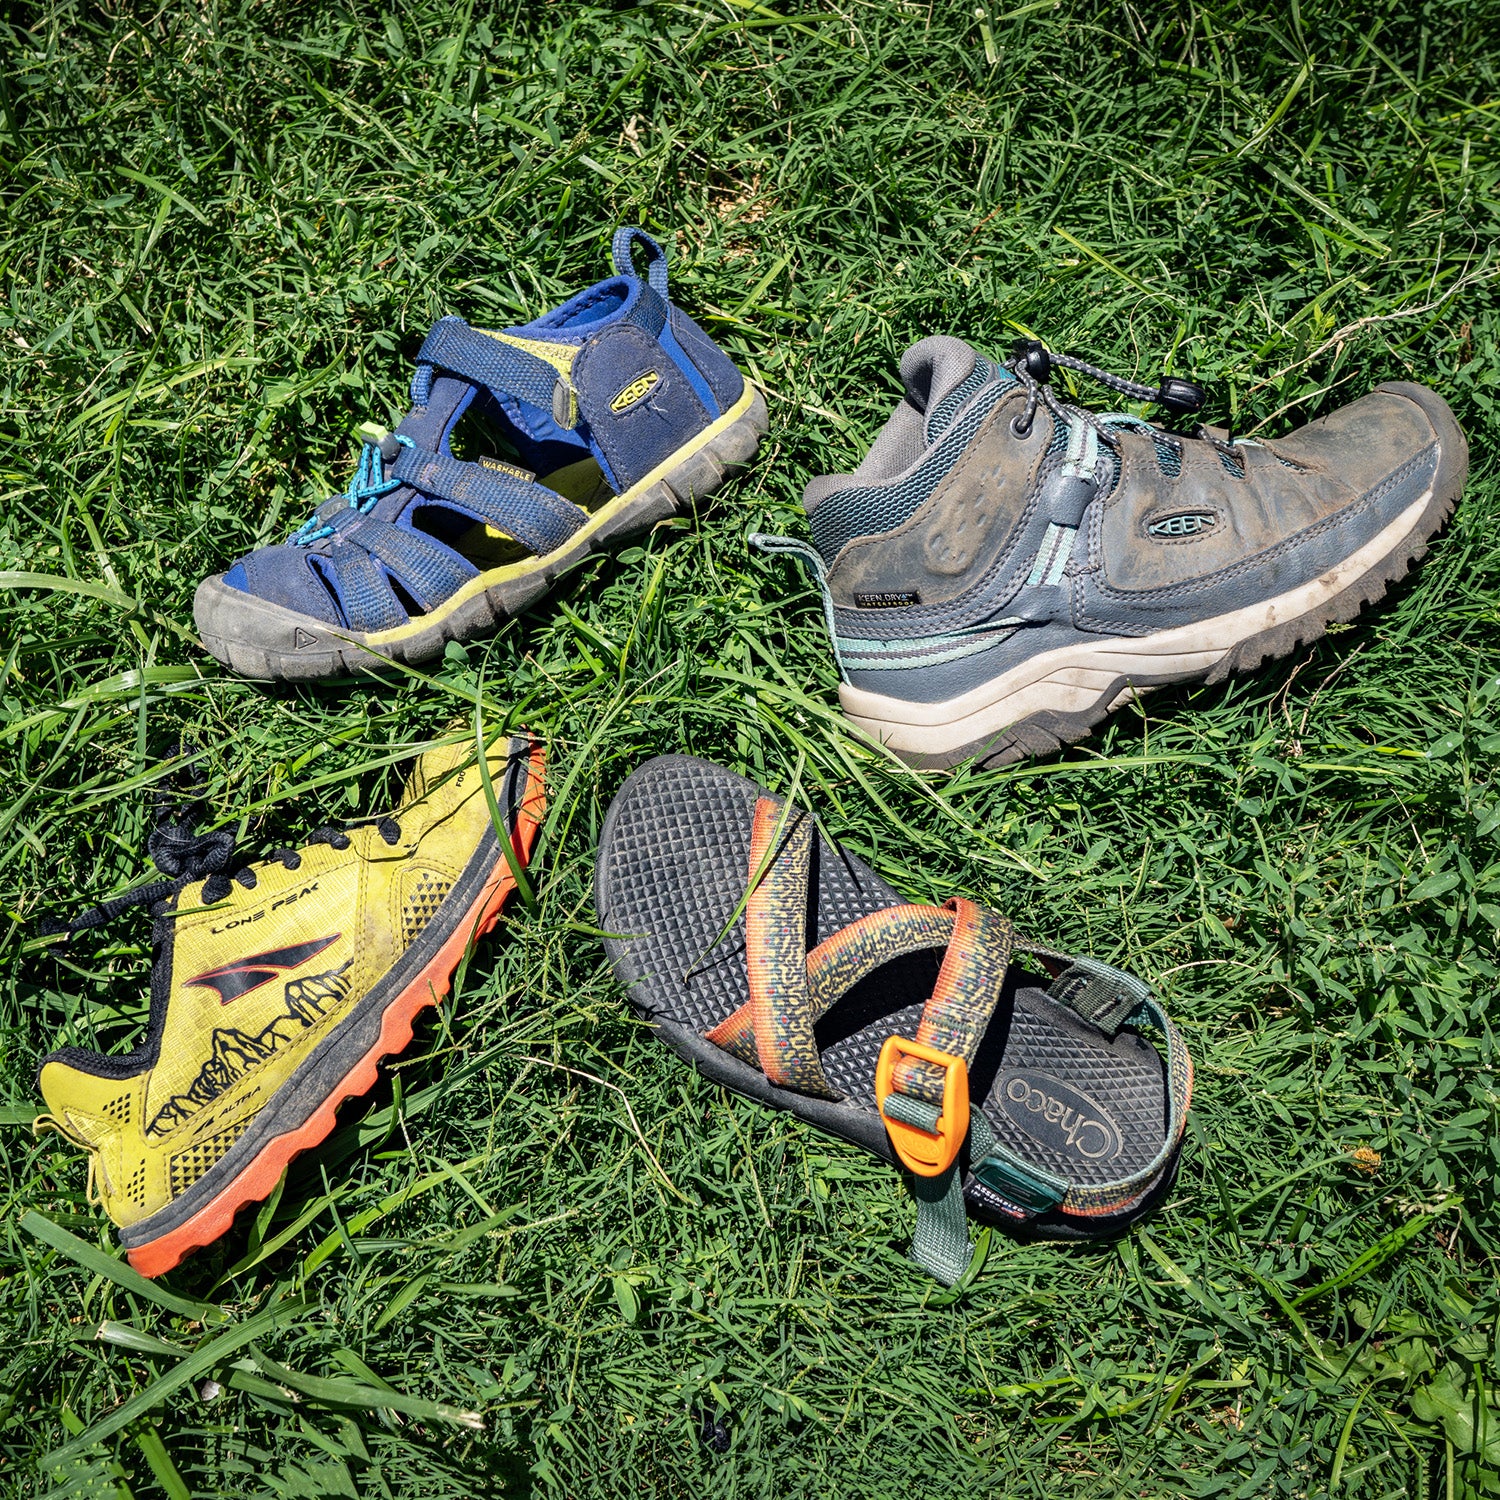 Five Great Outdoor Shoes for Your Kids